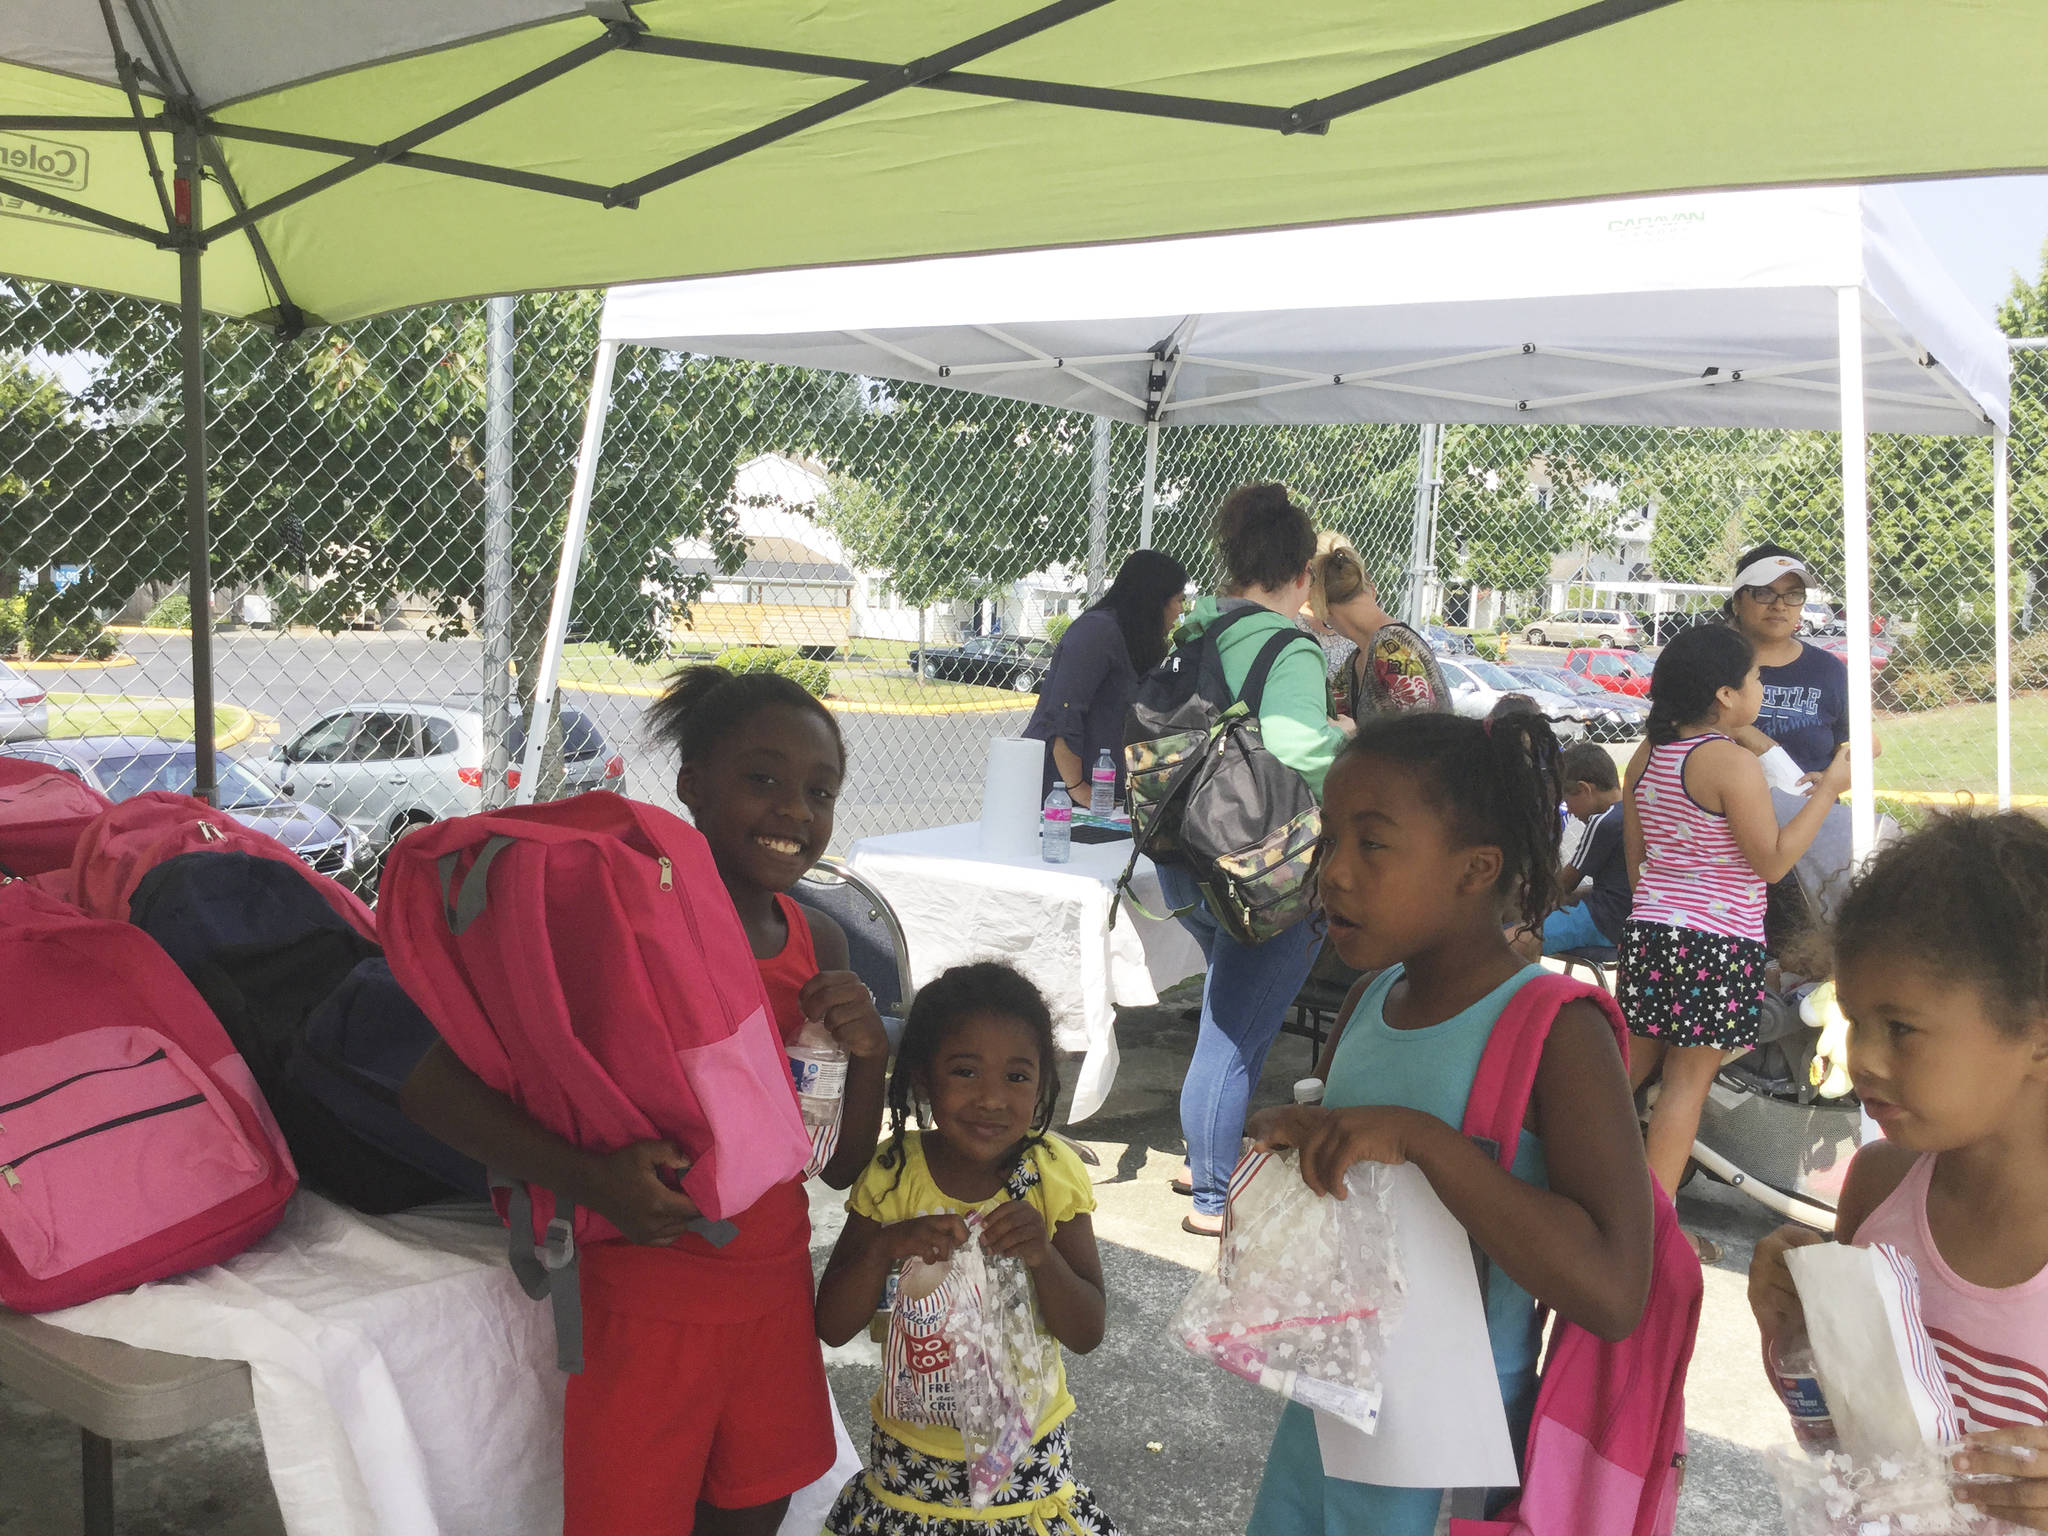 Cedars on 67th Apartments gives free back-to-school backpacks to tenant kids